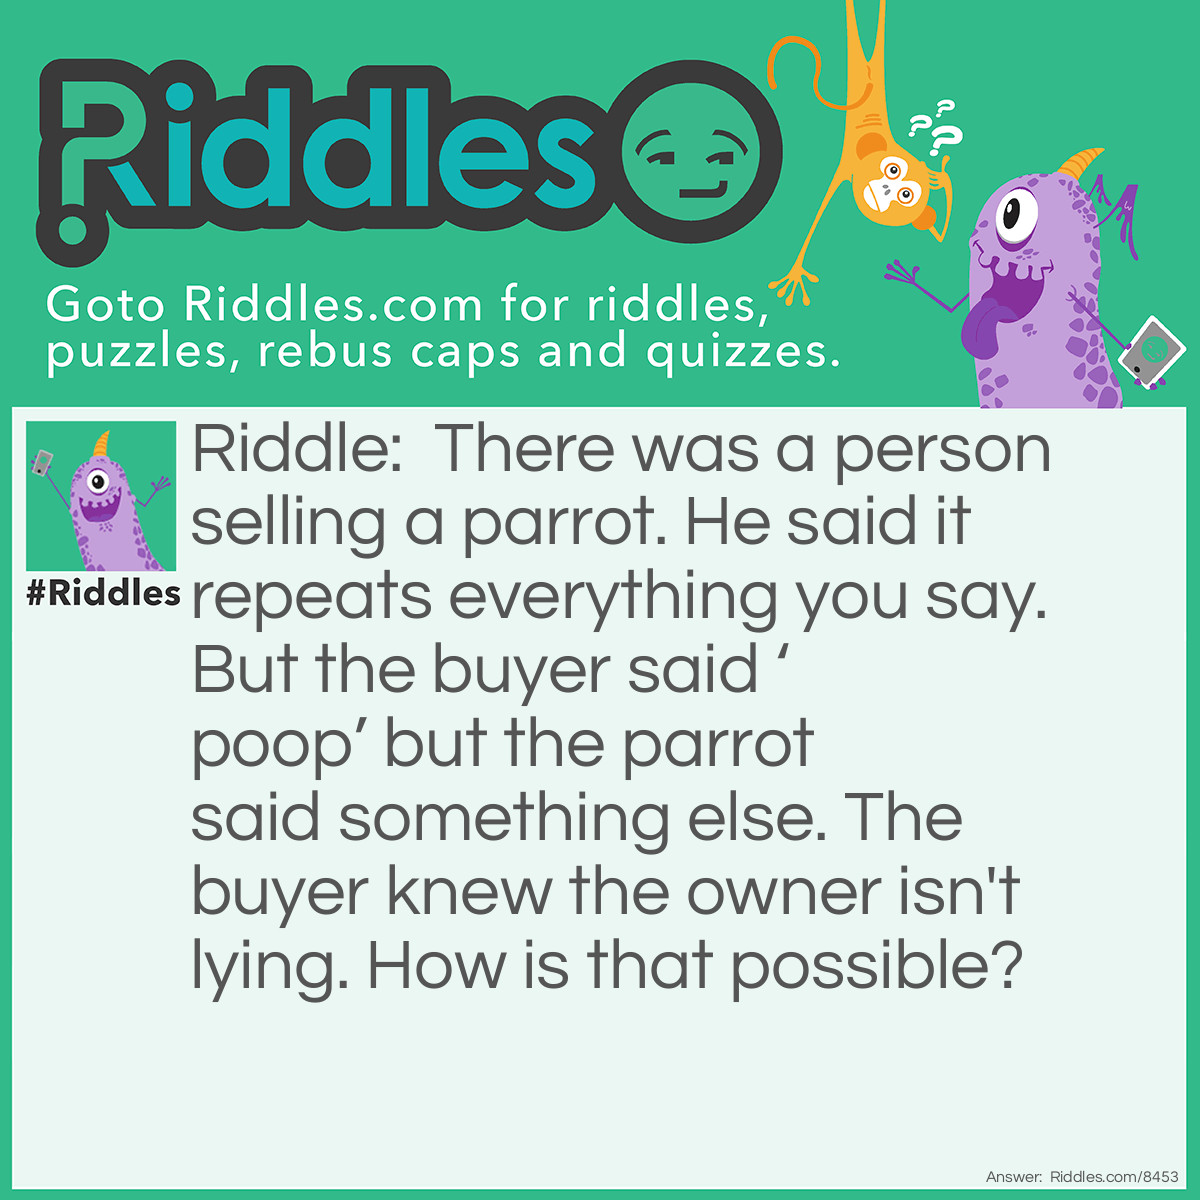 Riddle: There was a person selling a parrot. He said it repeats everything you say. But the buyer said 'poop' but the parrot said something else. The buyer knew the owner isn't lying. How is that possible? Answer: The parrot literally repeated ‘everything you say’!